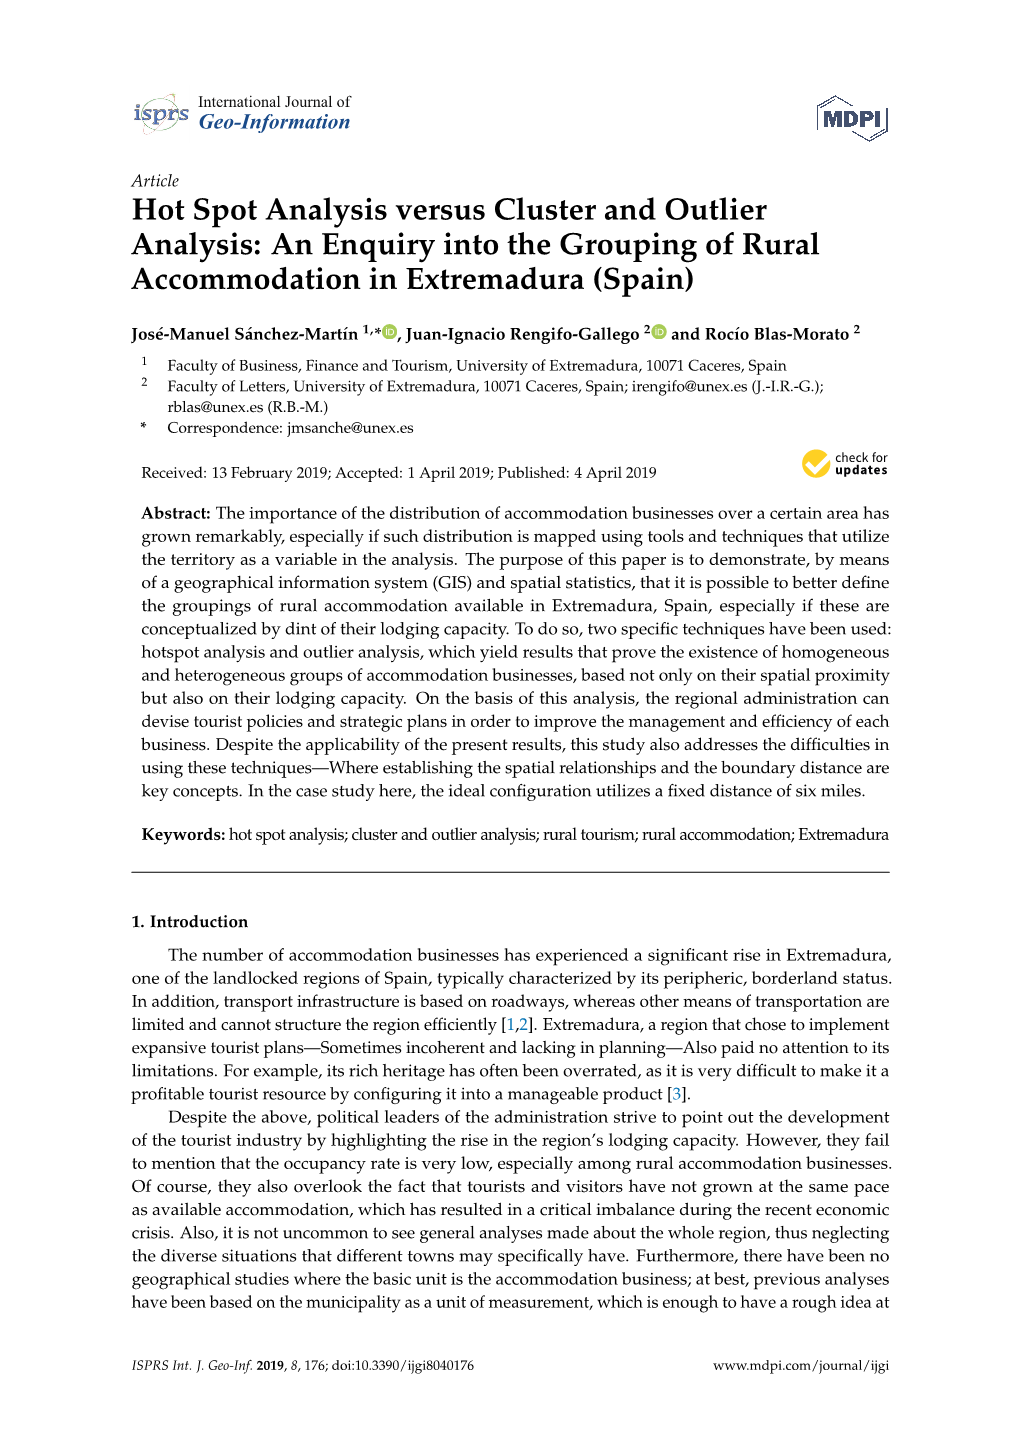 Hot Spot Analysis Versus Cluster and Outlier Analysis: an Enquiry Into the Grouping of Rural Accommodation in Extremadura (Spain)